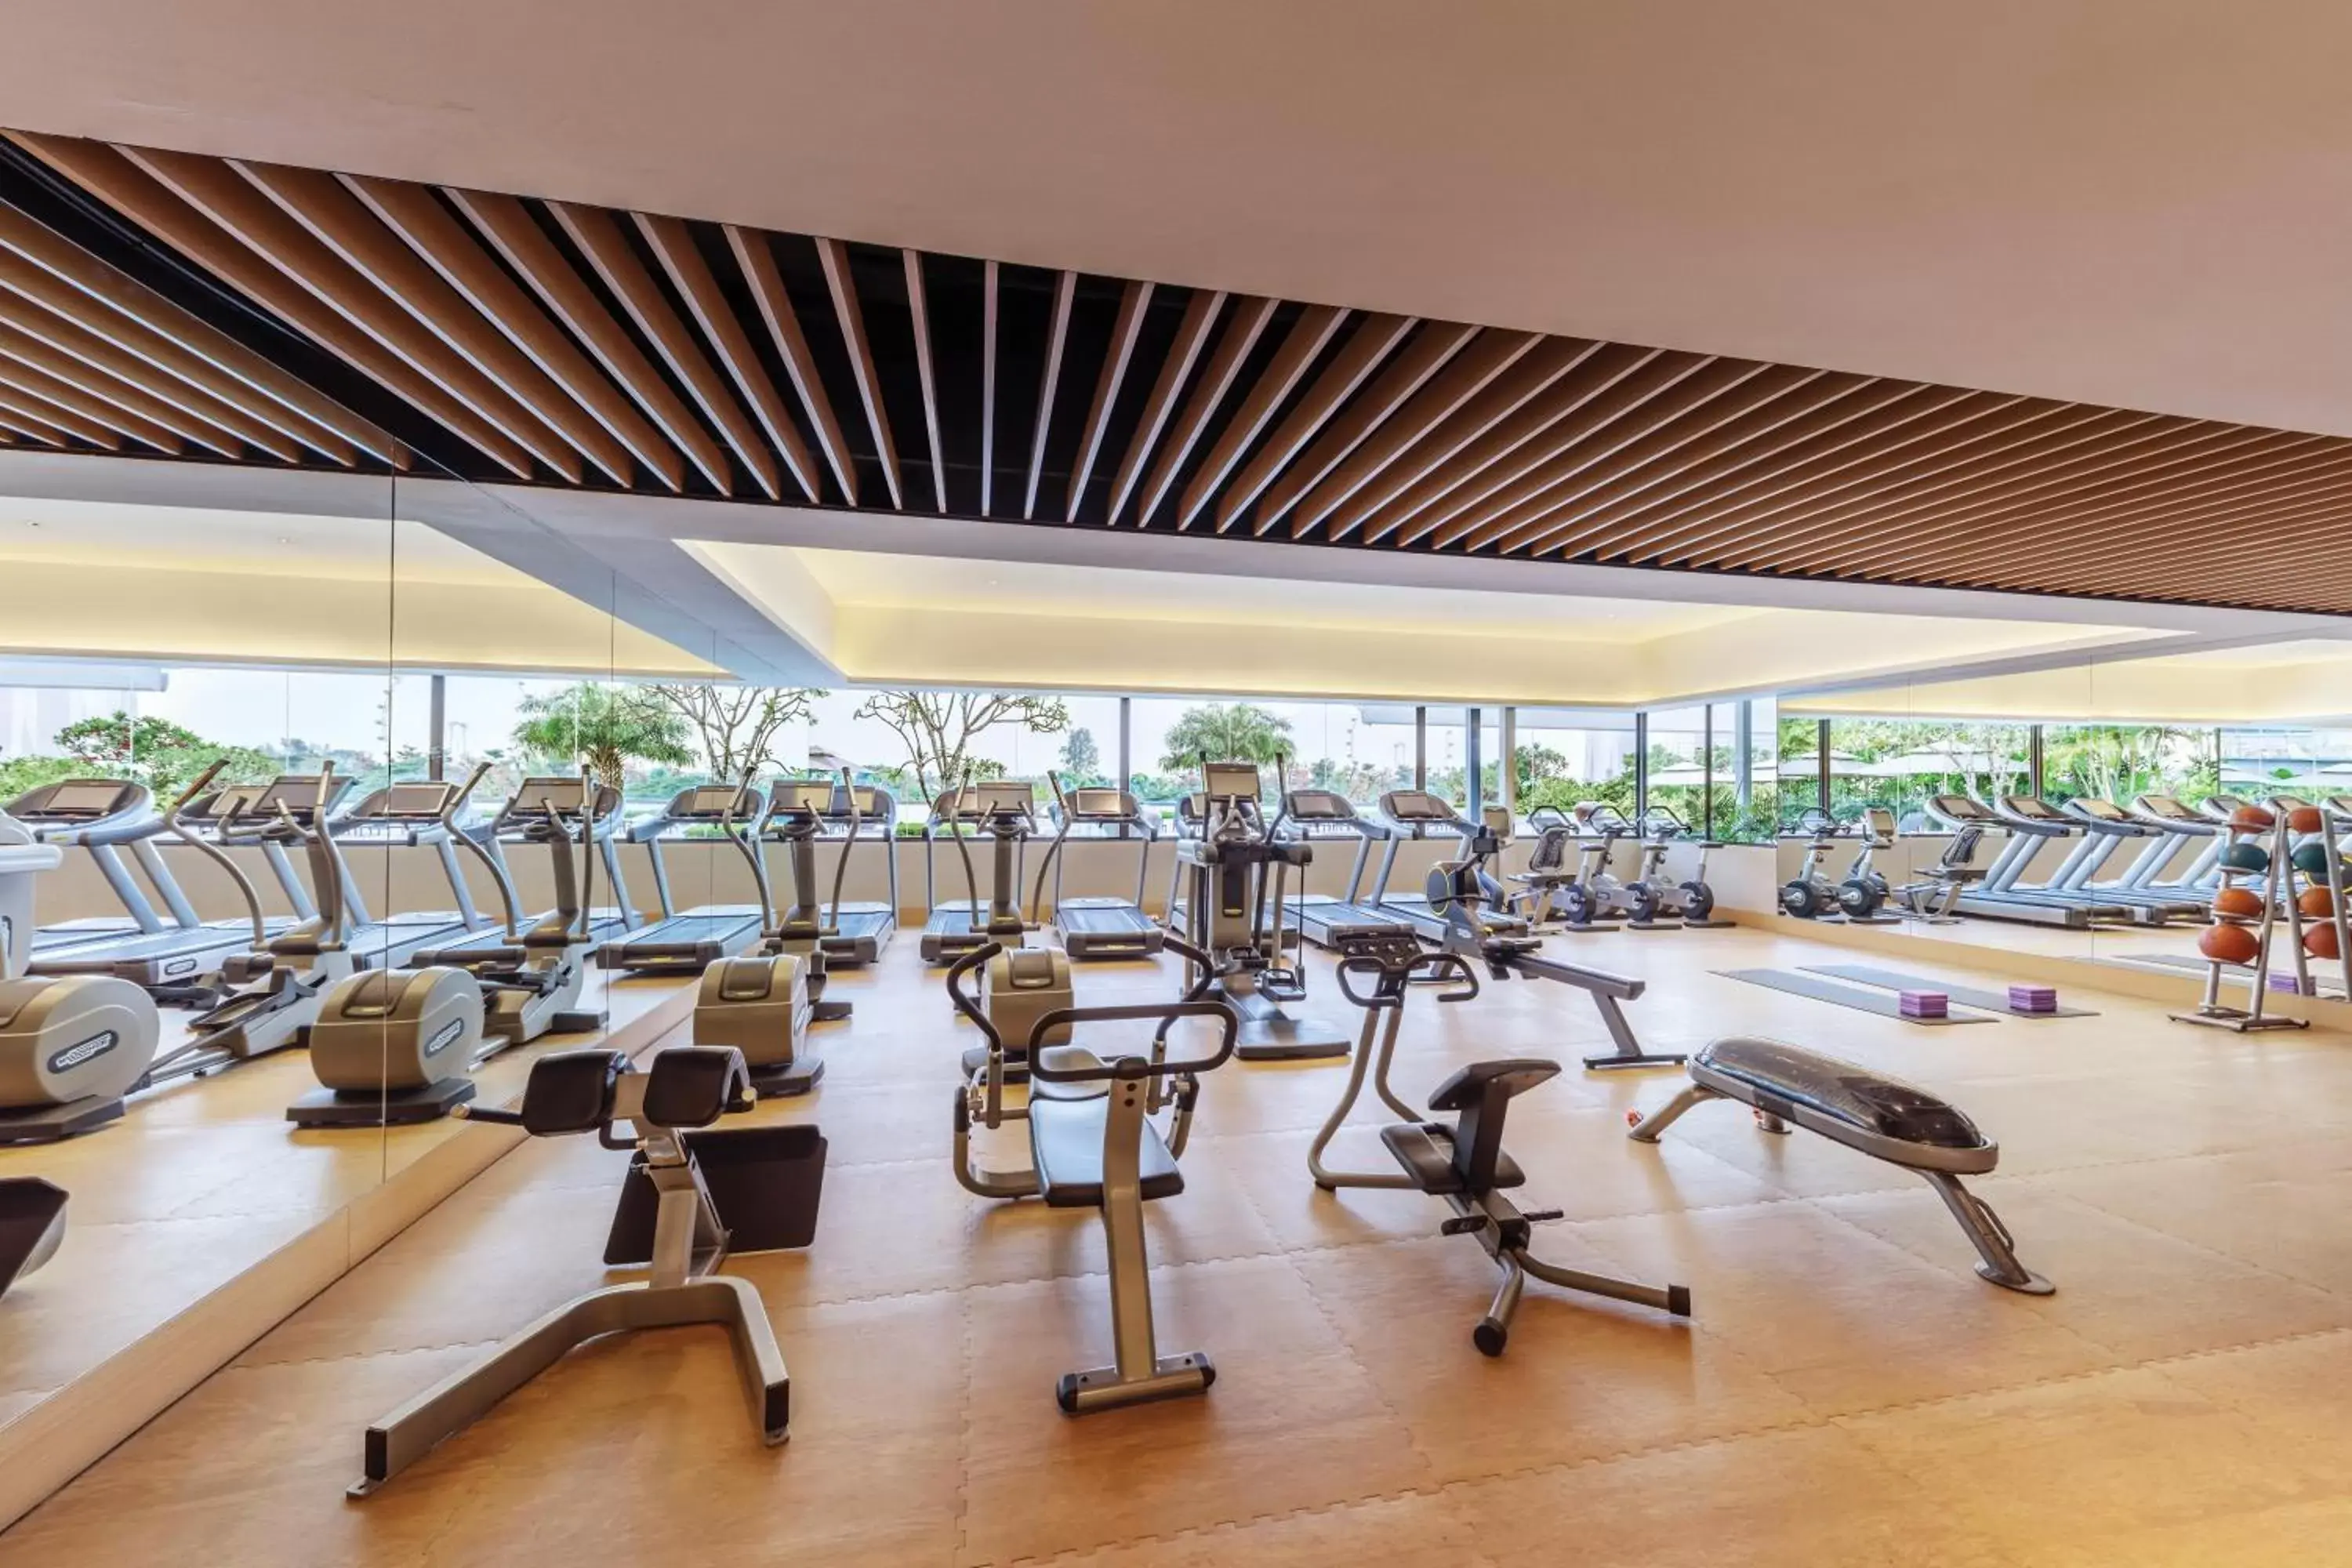 Fitness centre/facilities, Fitness Center/Facilities in PARKROYAL on Beach Road, Singapore